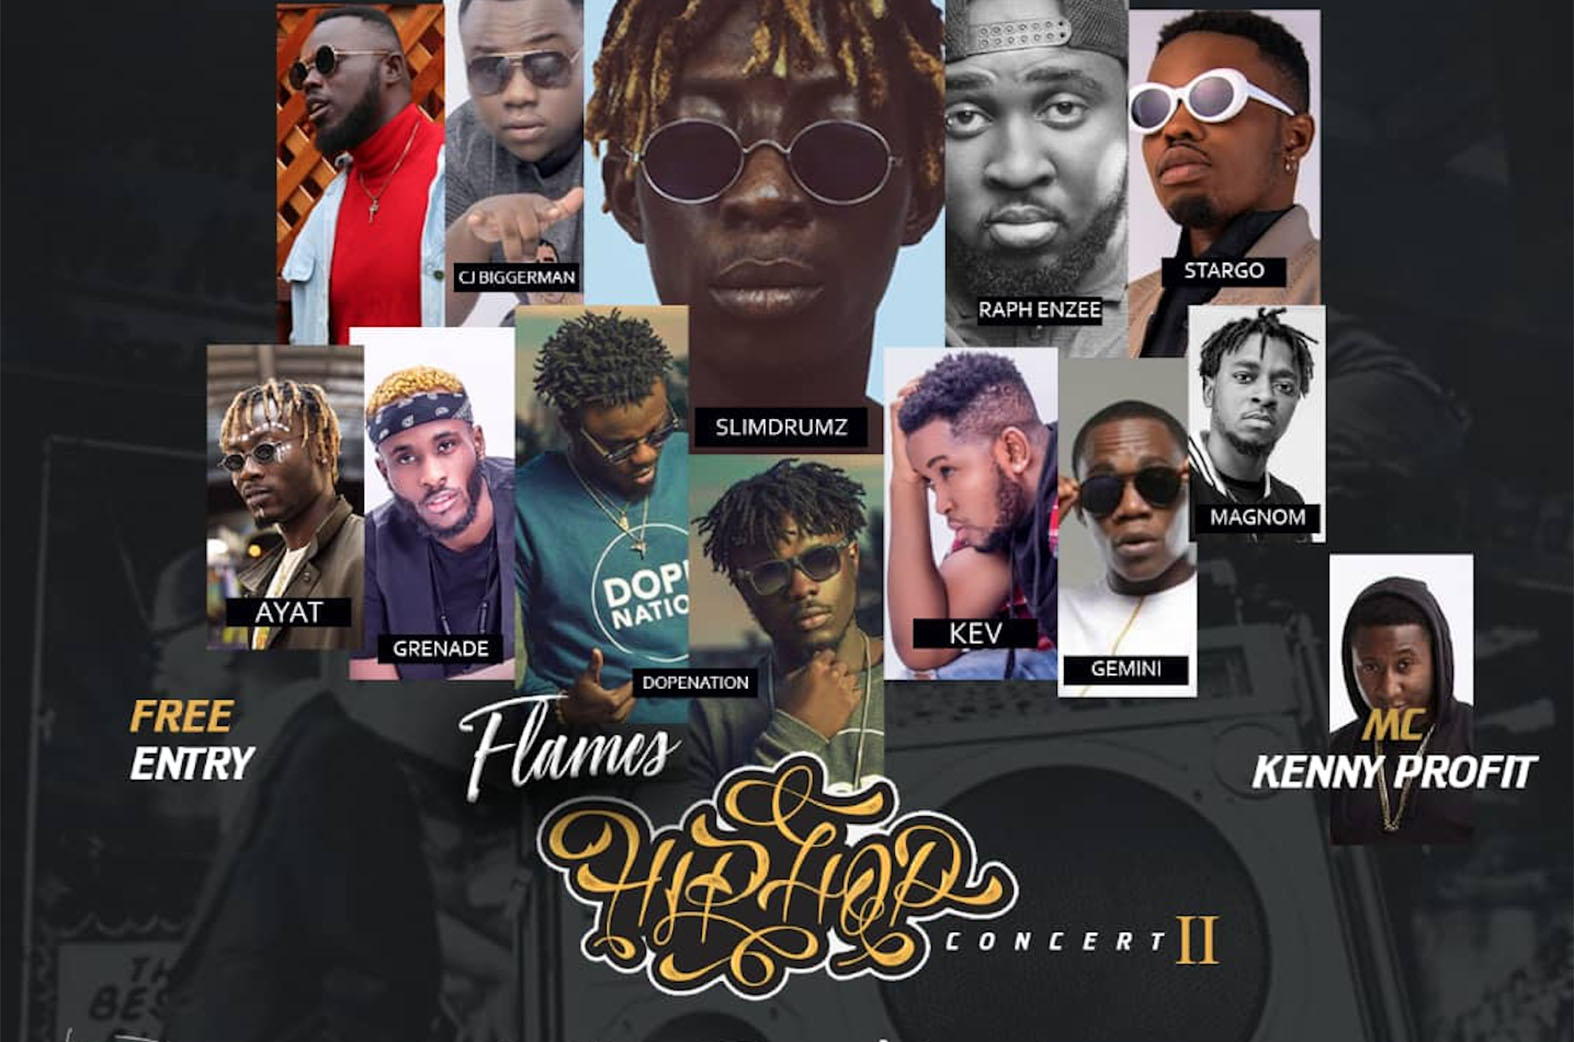 Second edition of Flames Hiphop Concert happening on 20th July